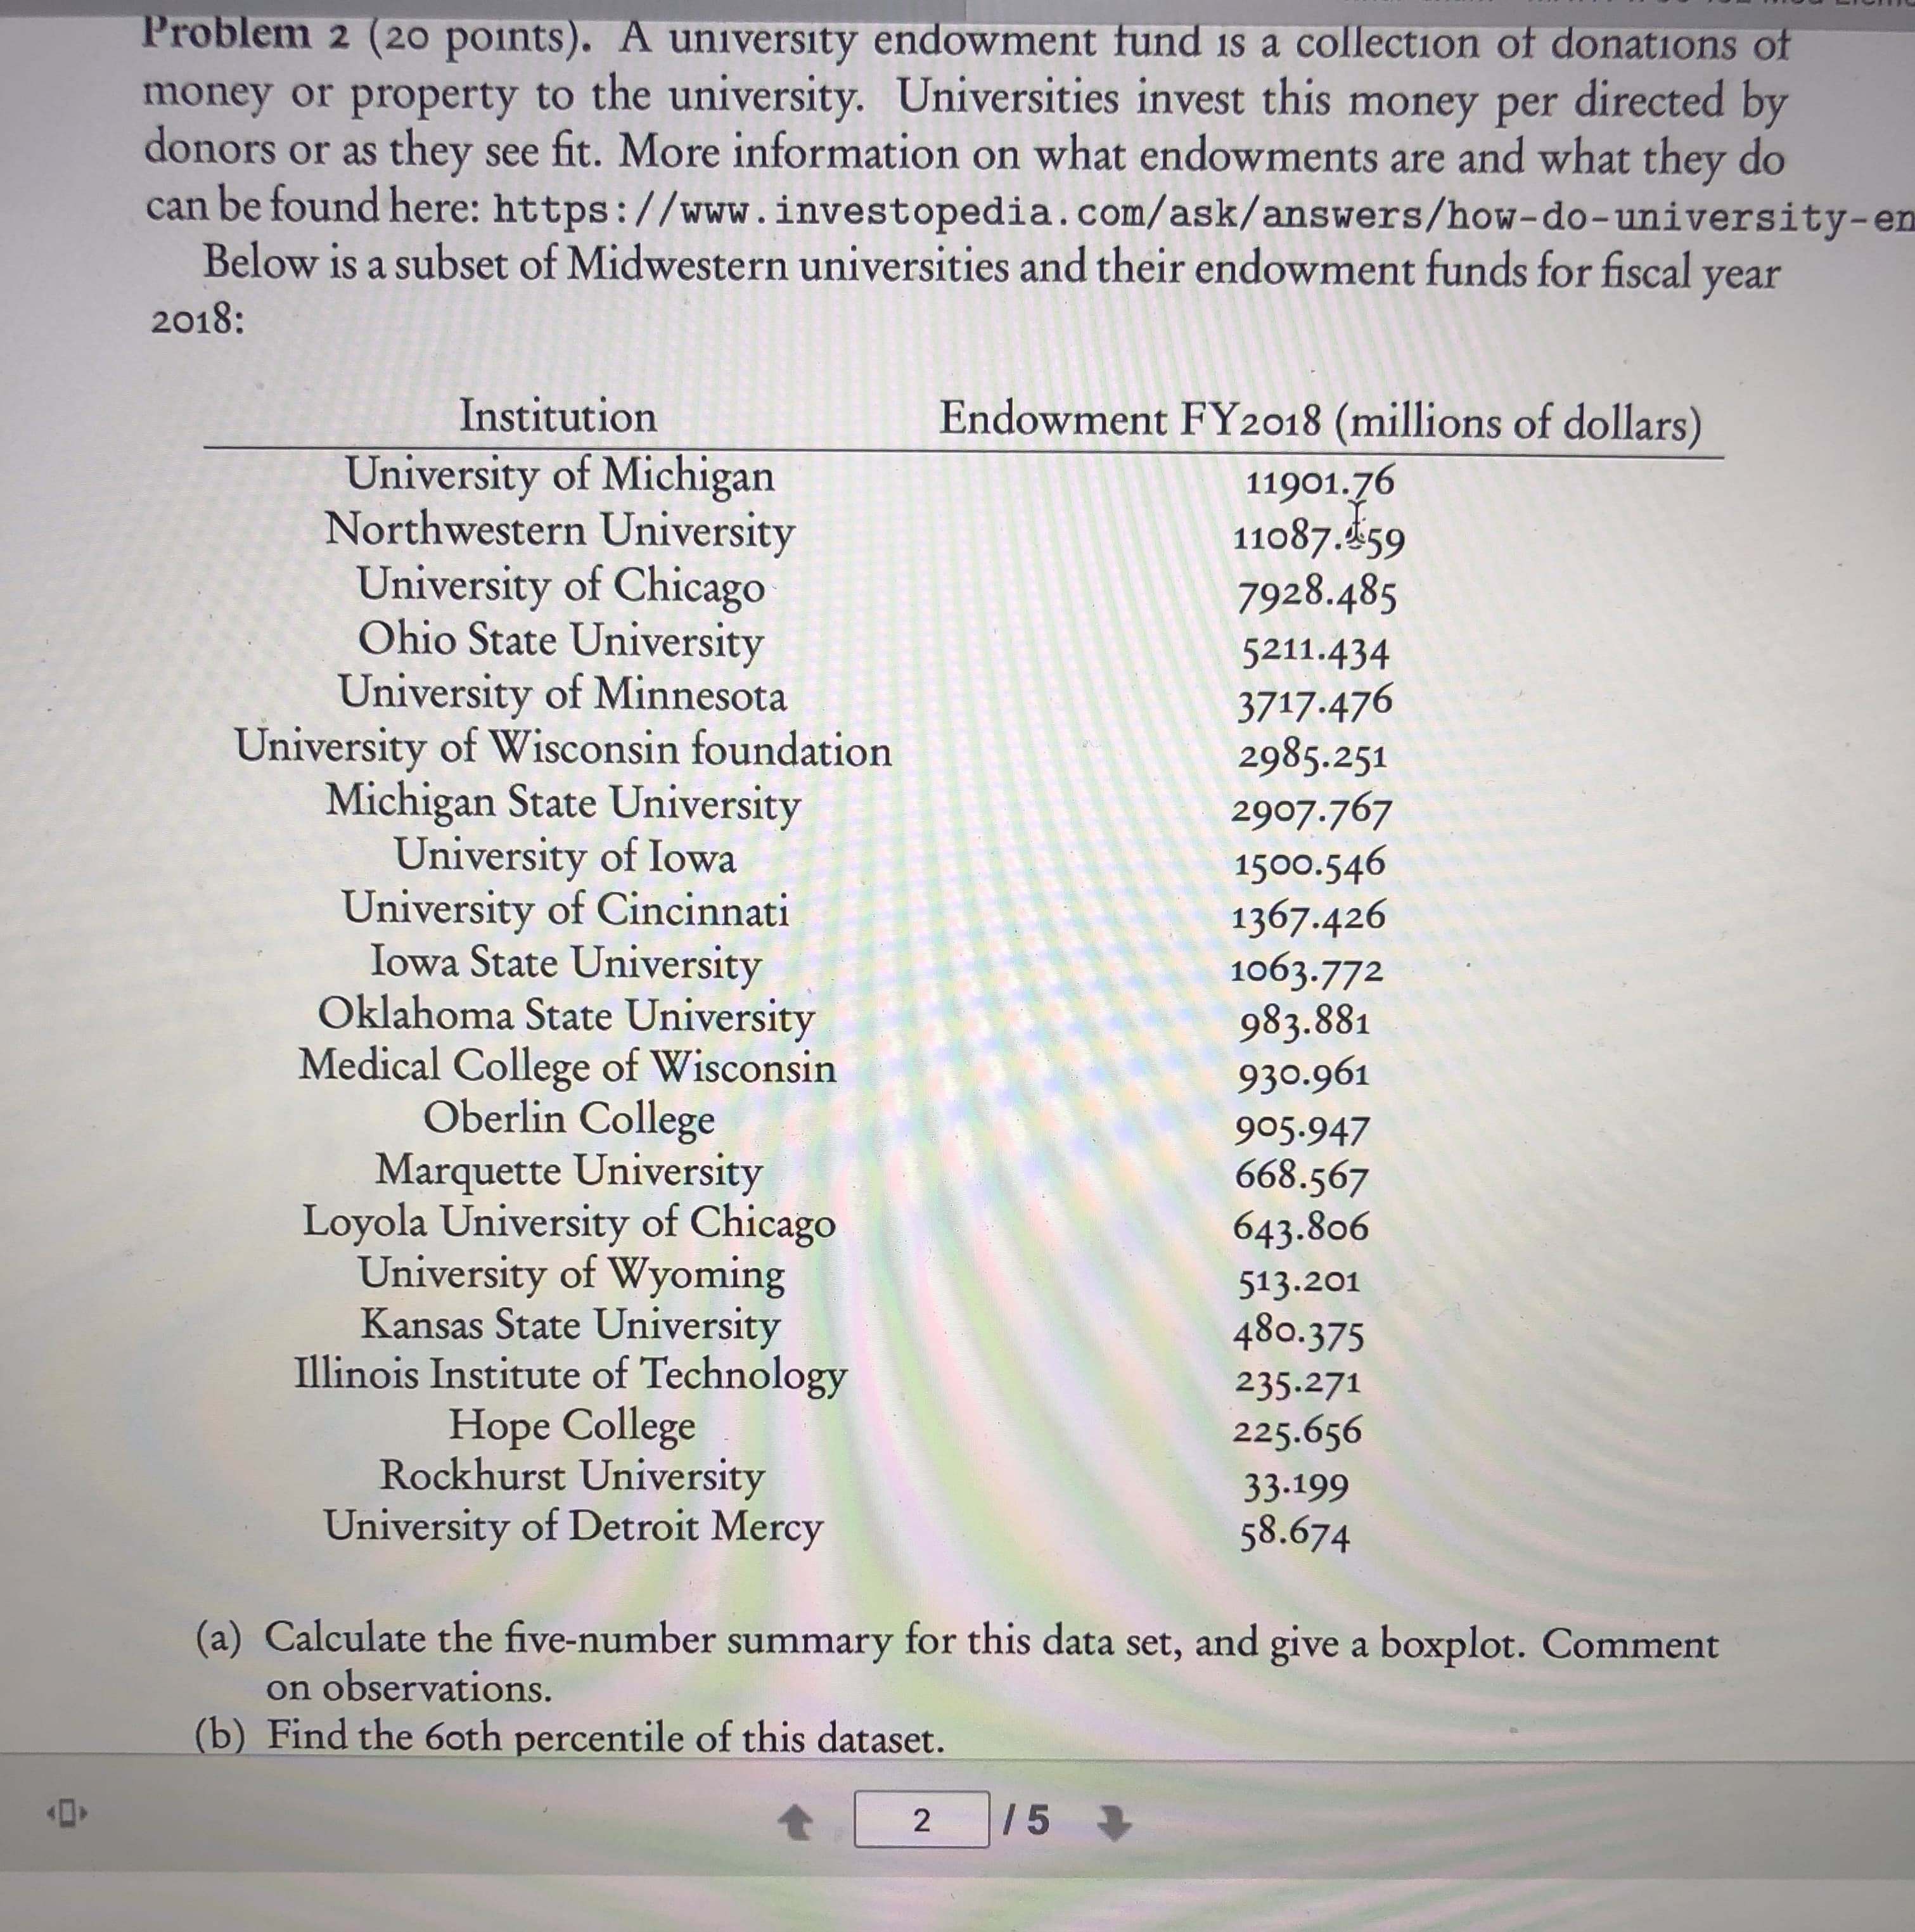 Problem 2 (20 points). A university endowment fund is a collection of donations of
money or property to the university. Universities invest this money per directed by
donors or as they see fit. More information on what endowments are and what they do
can be found here: https://www.investopedia.com/ask/answers/how-do-university-en
Below is a subset of Midwestern universities and their endowment funds for fiscal year
2018:
Endowment FY2018 (millions of dollars)
Institution
University of Michigan
Northwestern University
University of Chicago
Ohio State University
University of Minnesota
University of Wisconsin foundation
Michigan State University
University of Iowa
University of Cincinnati
Iowa State University
Oklahoma State University
Medical College of Wisconsin
Oberlin College
Marquette University
Loyola University of Chicago
University of Wyoming
Kansas State University
Illinois Institute of Technology
Hope College
Rockhurst University
University of Detroit Mercy
11901.76
11087.459
7928.485
5211.434
3717.476
2985.251
2907.767
1500.546
1367.426
1063.772
983.881
930.961
905.947
668.567
643.806
513.201
480.375
235.271
225.656
33.199
58.674
(a) Calculate the five-number summary for this data set, and give a boxplot. Comment
on observations.
(b) Find the 6oth percentile of this dataset.
/5
